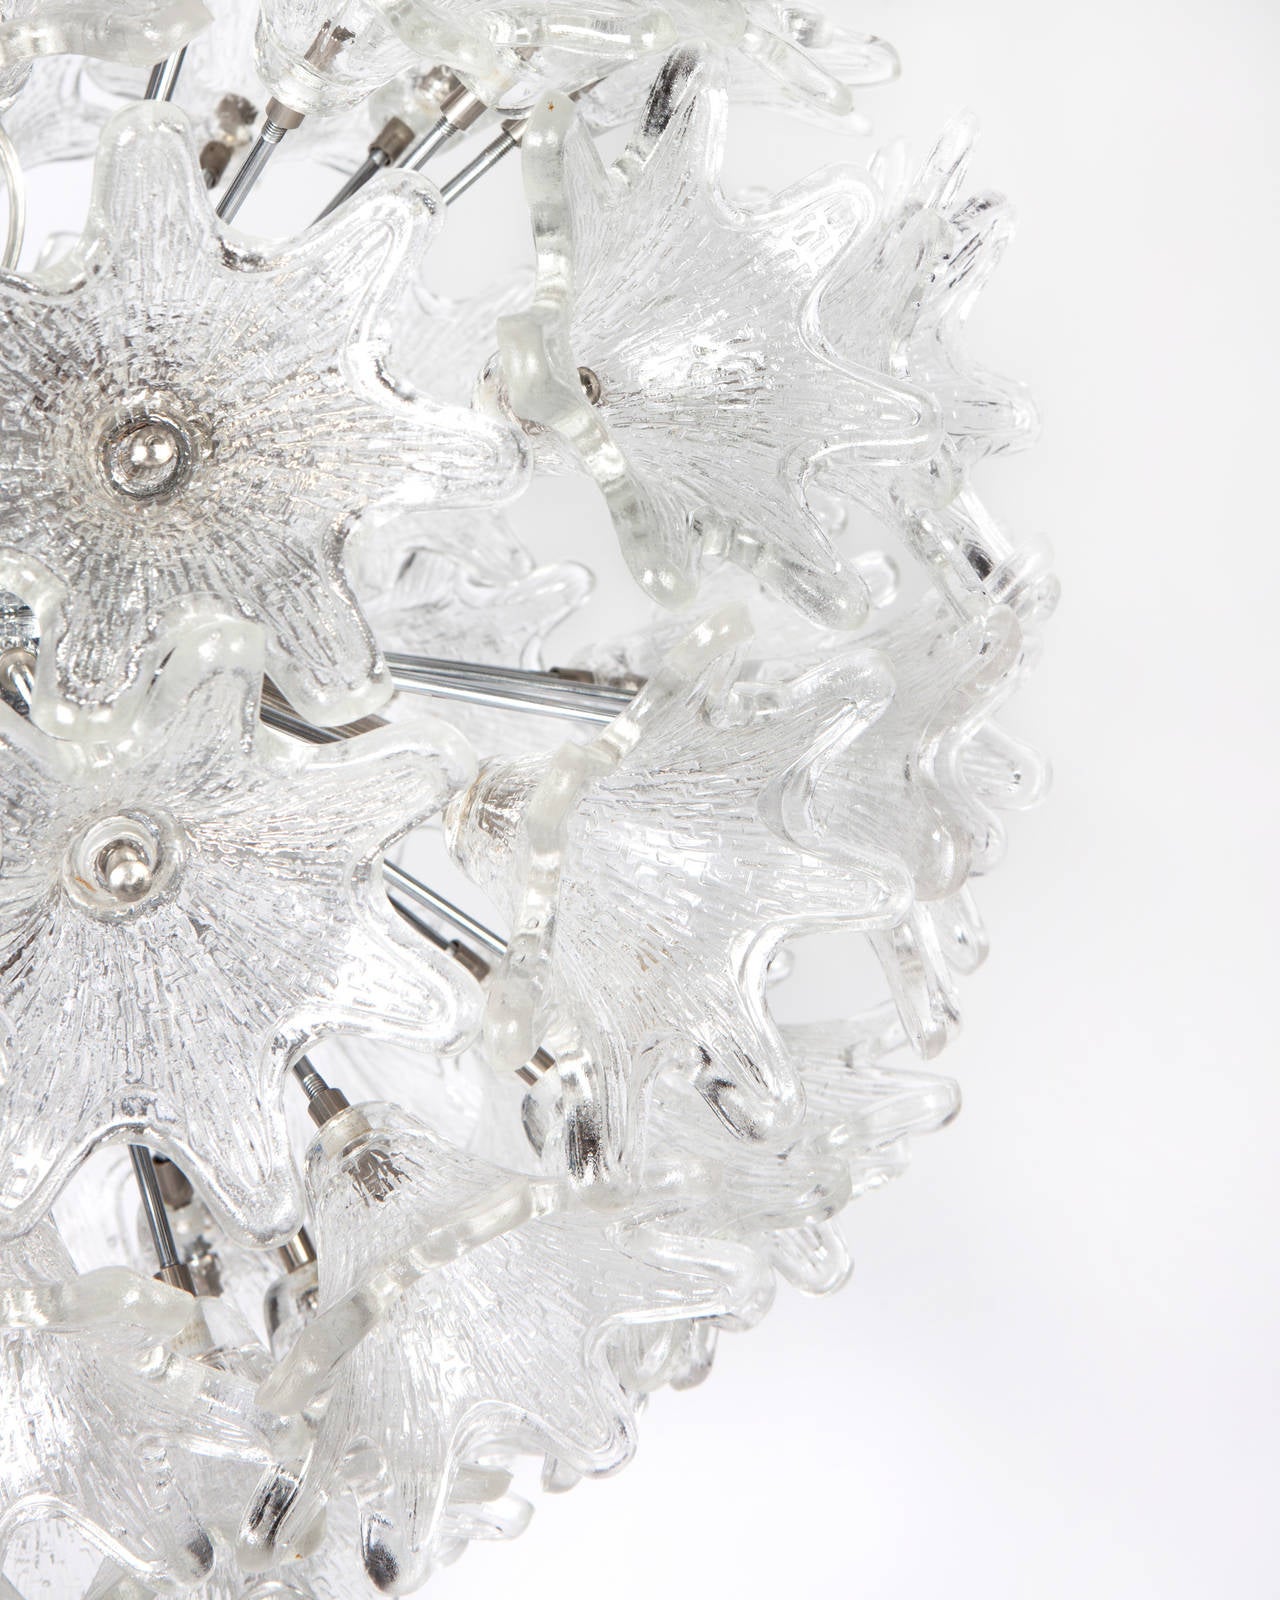 AHL3883

Circa 1960
A nickel sputnik chandelier with three-dimensional foliate glass pieces. Due to the antique nature of this fixture, there may be some nicks or imperfections in the glass.

Dimensions:
Current height: 54-3/4